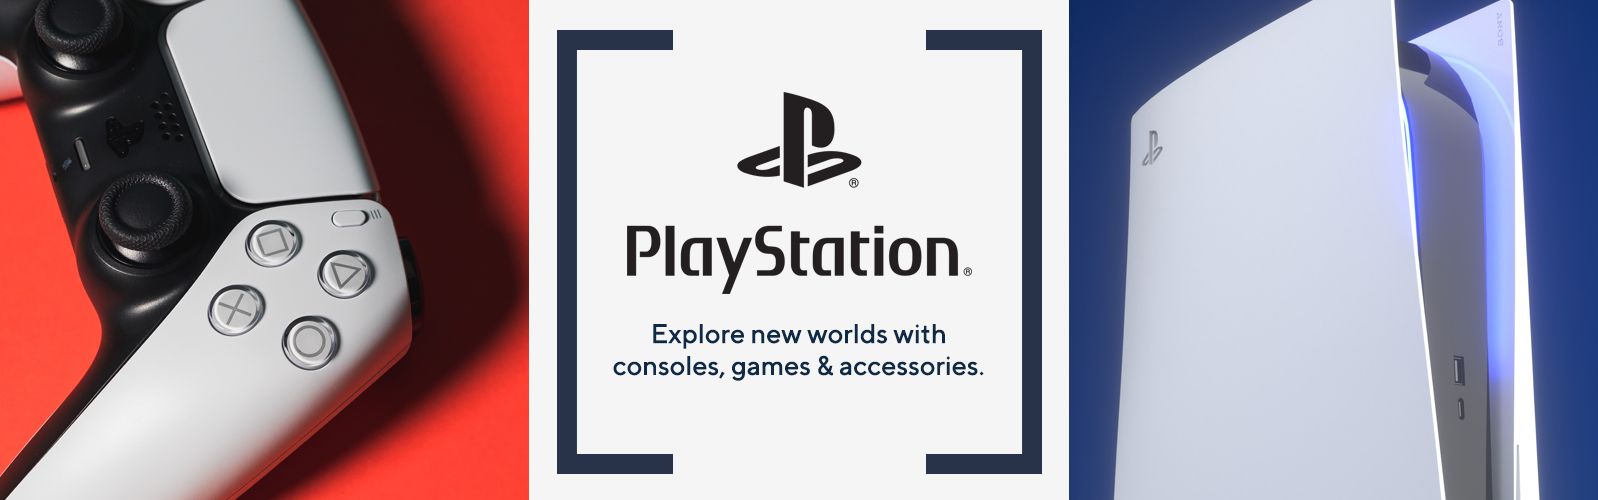 PlayStation: Explore new worlds with consoles, games & accessories. 